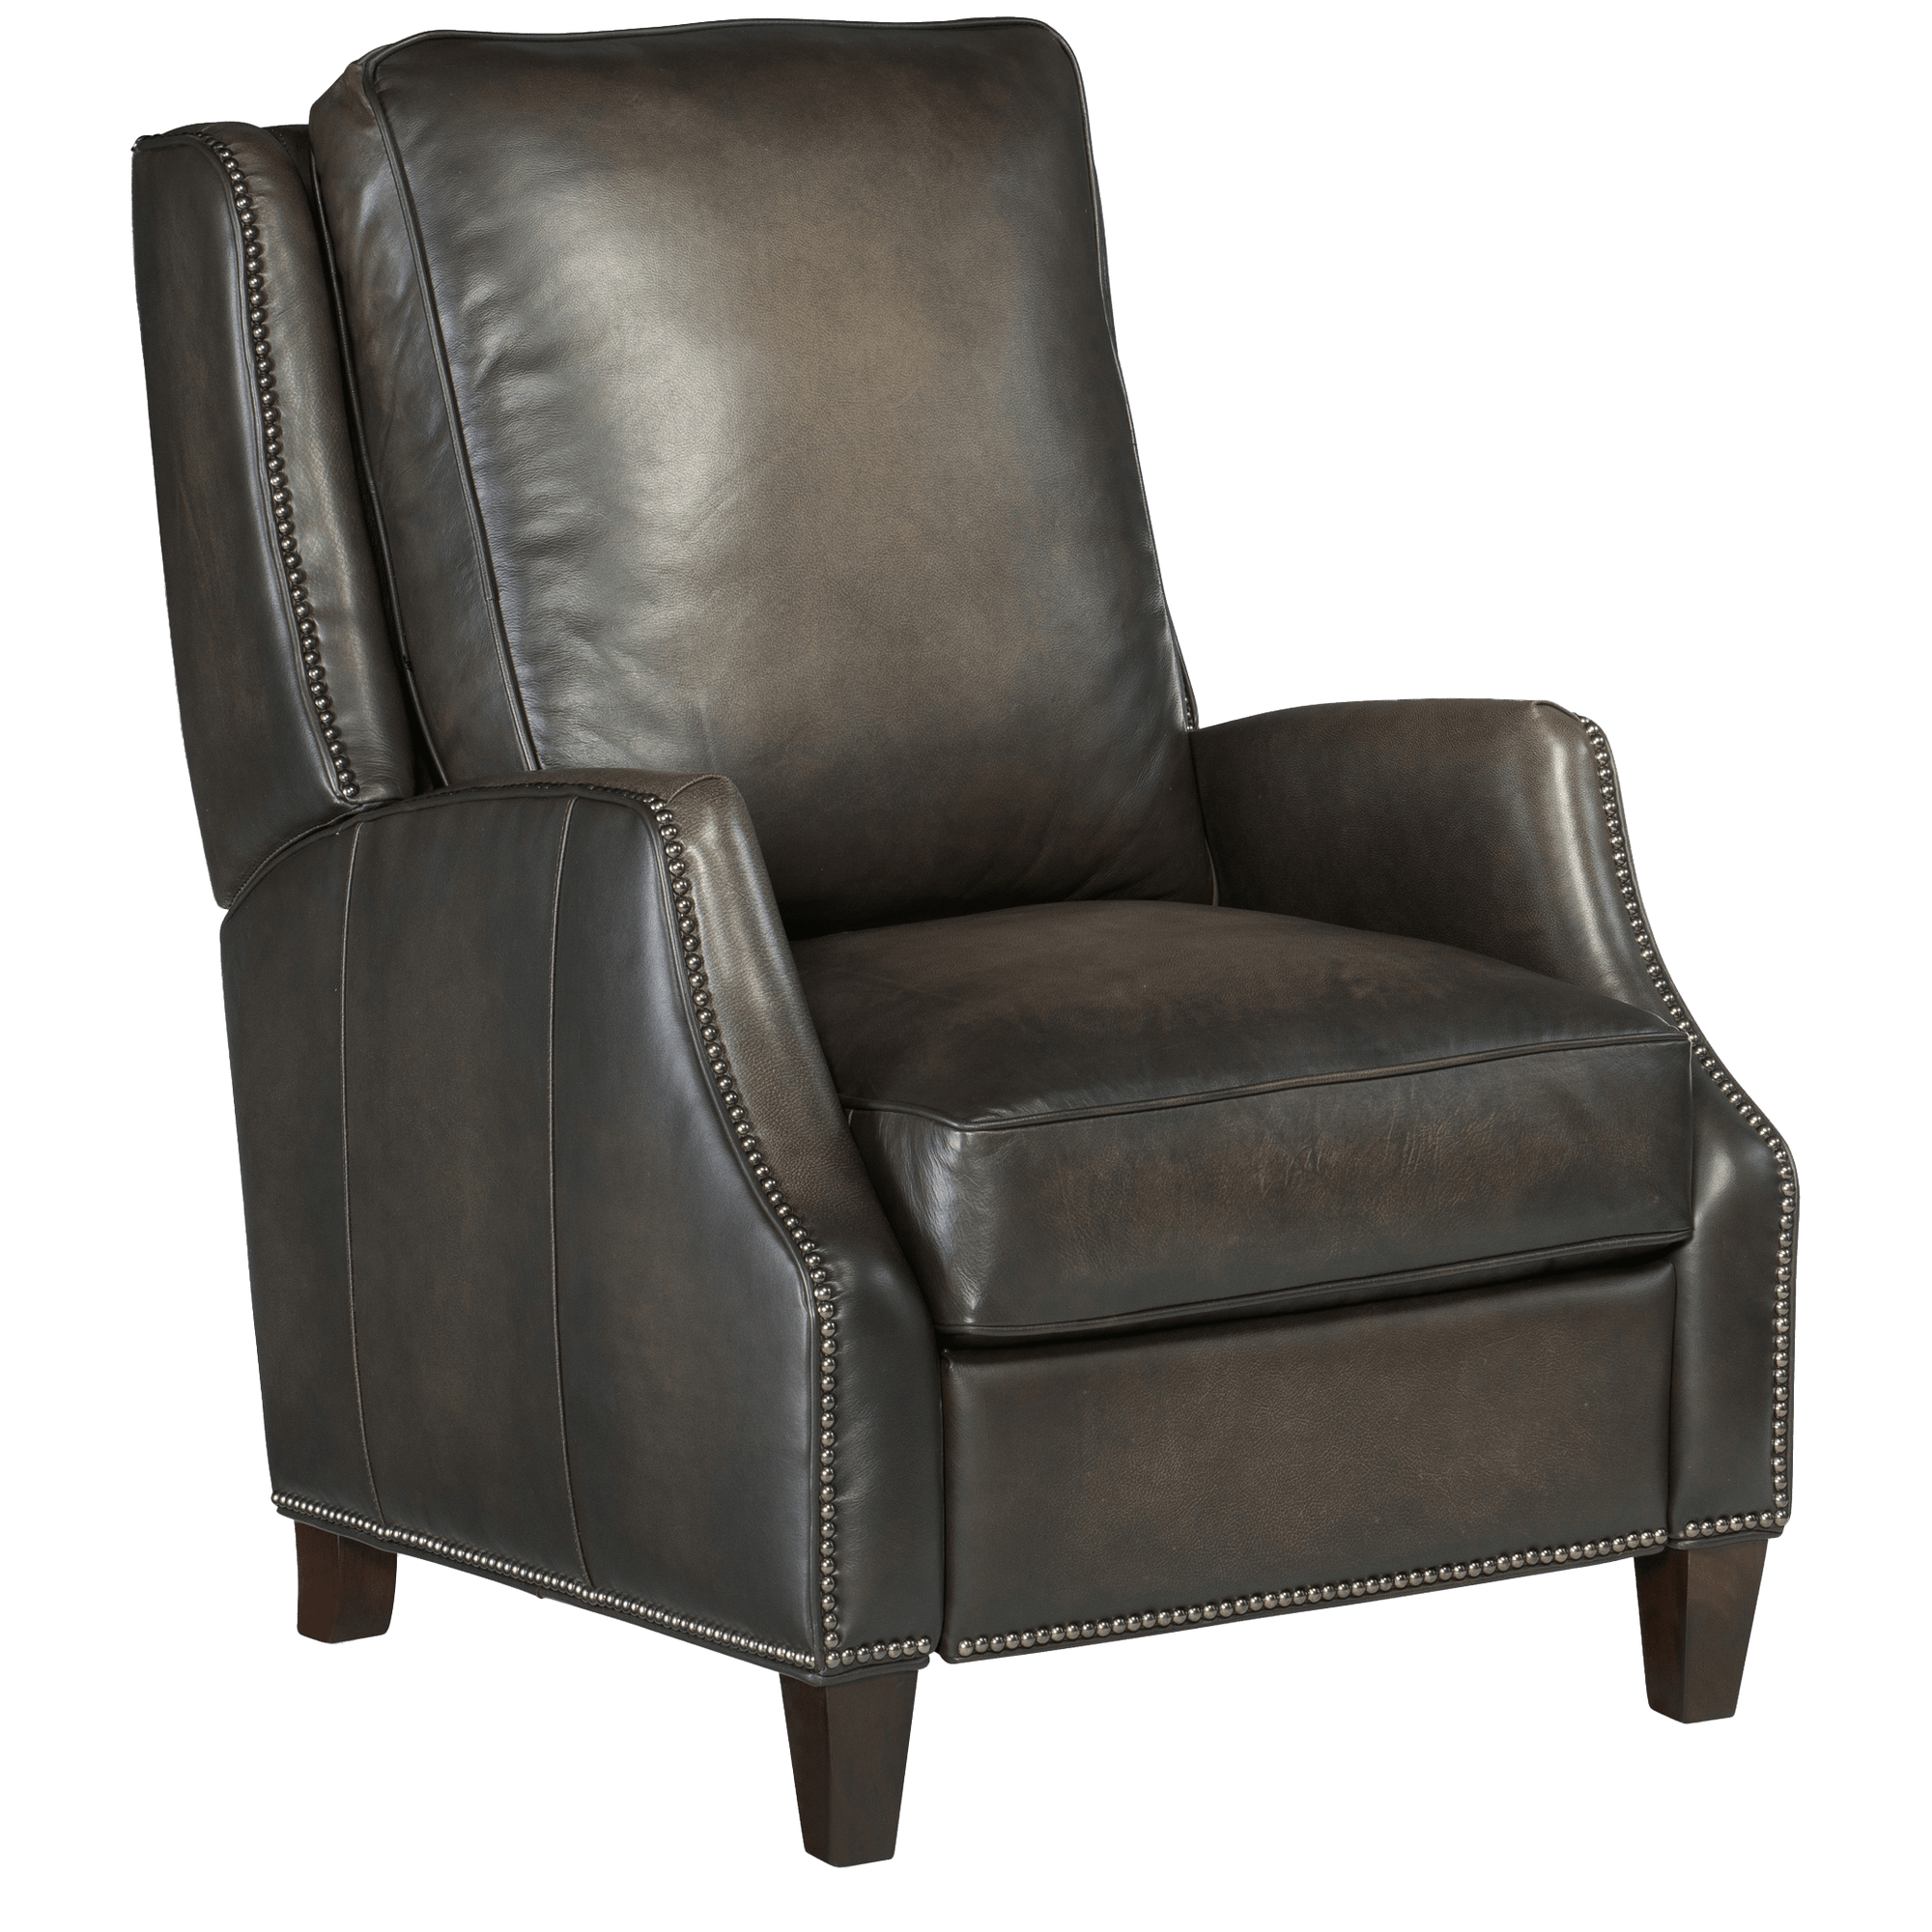 Elicce Manual Push Back Recliner, Leather - Coja